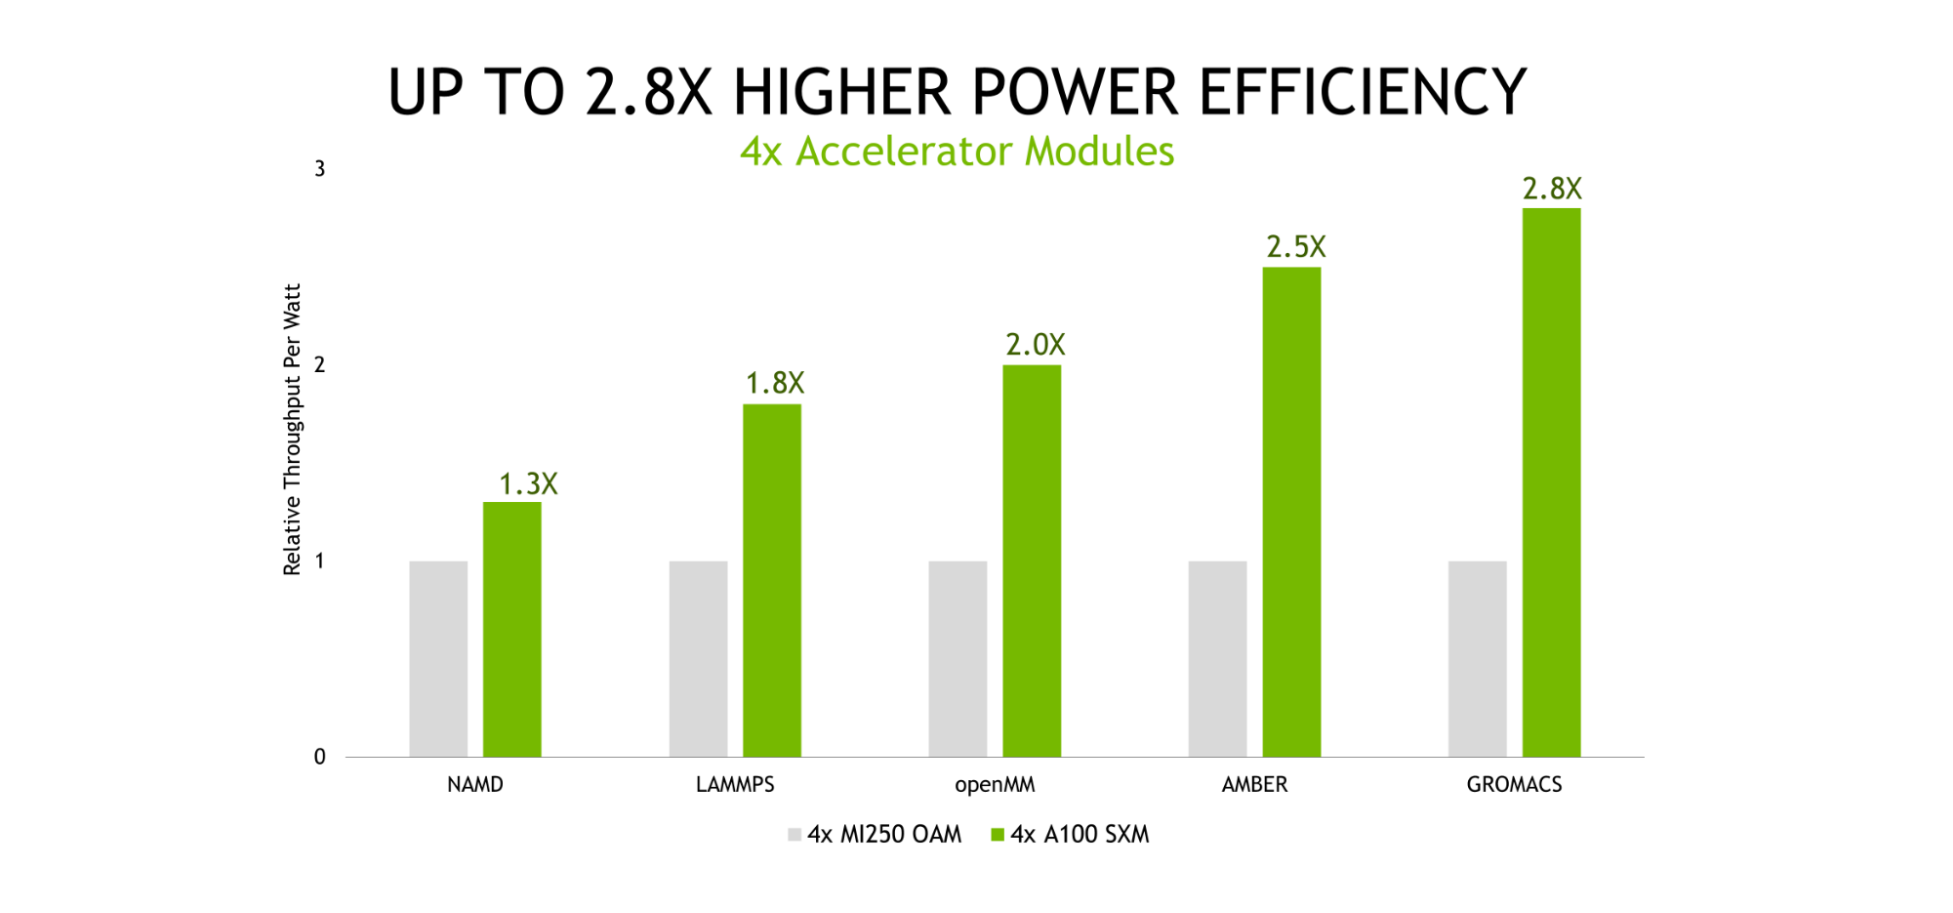 Chart shows the energy efficiency of four NVIDIA A100 GPUs compared to four AMD MI250s across five popular HPC applications. NVIDIA A100 delivers up to 2.8x higher power efficiency.